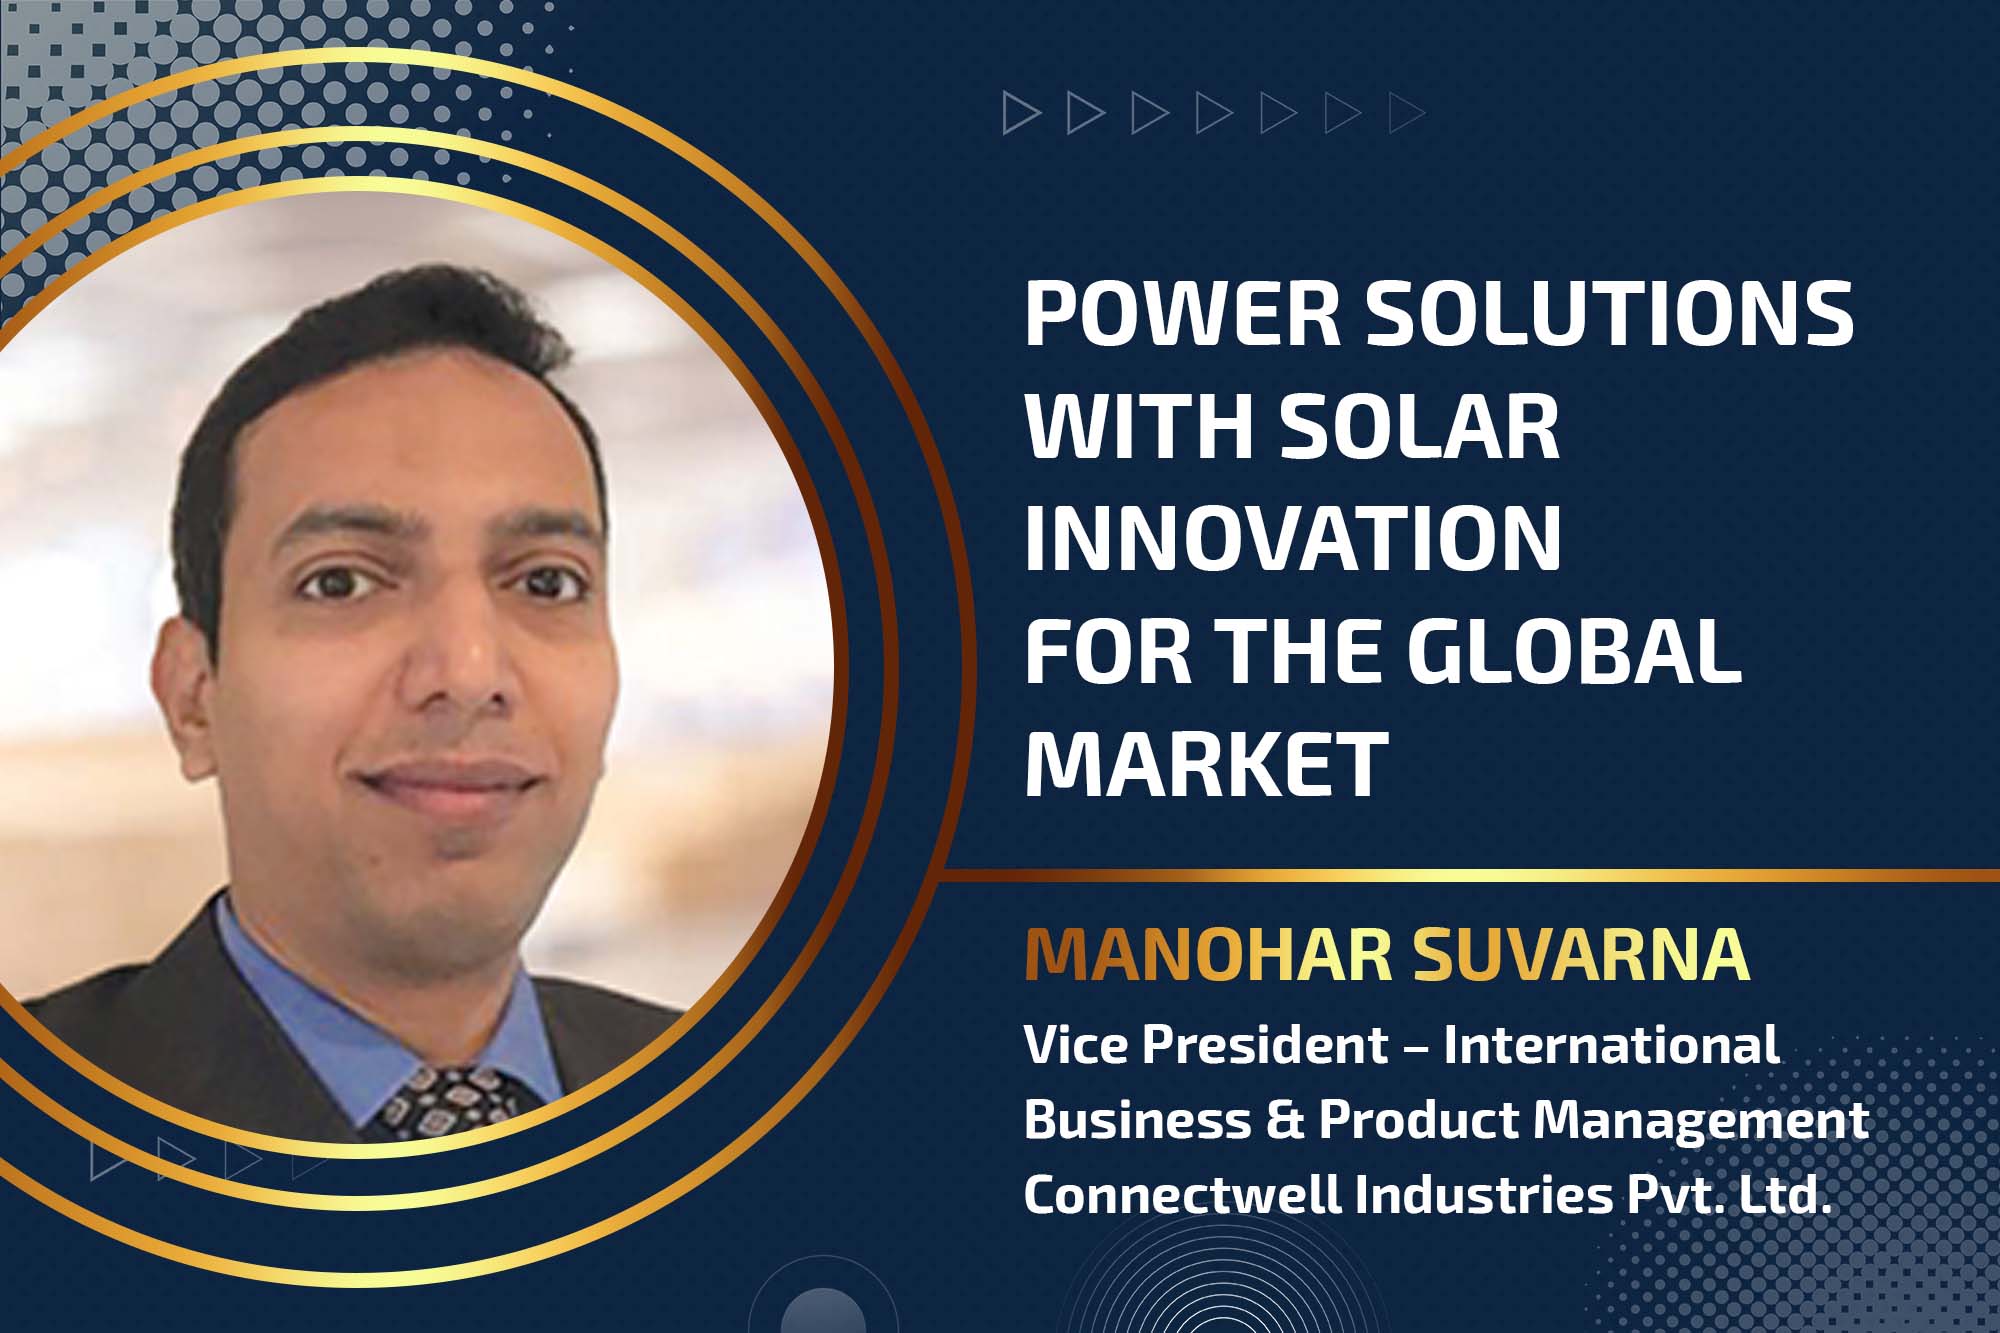 Power solutions with solar innovation for the global market